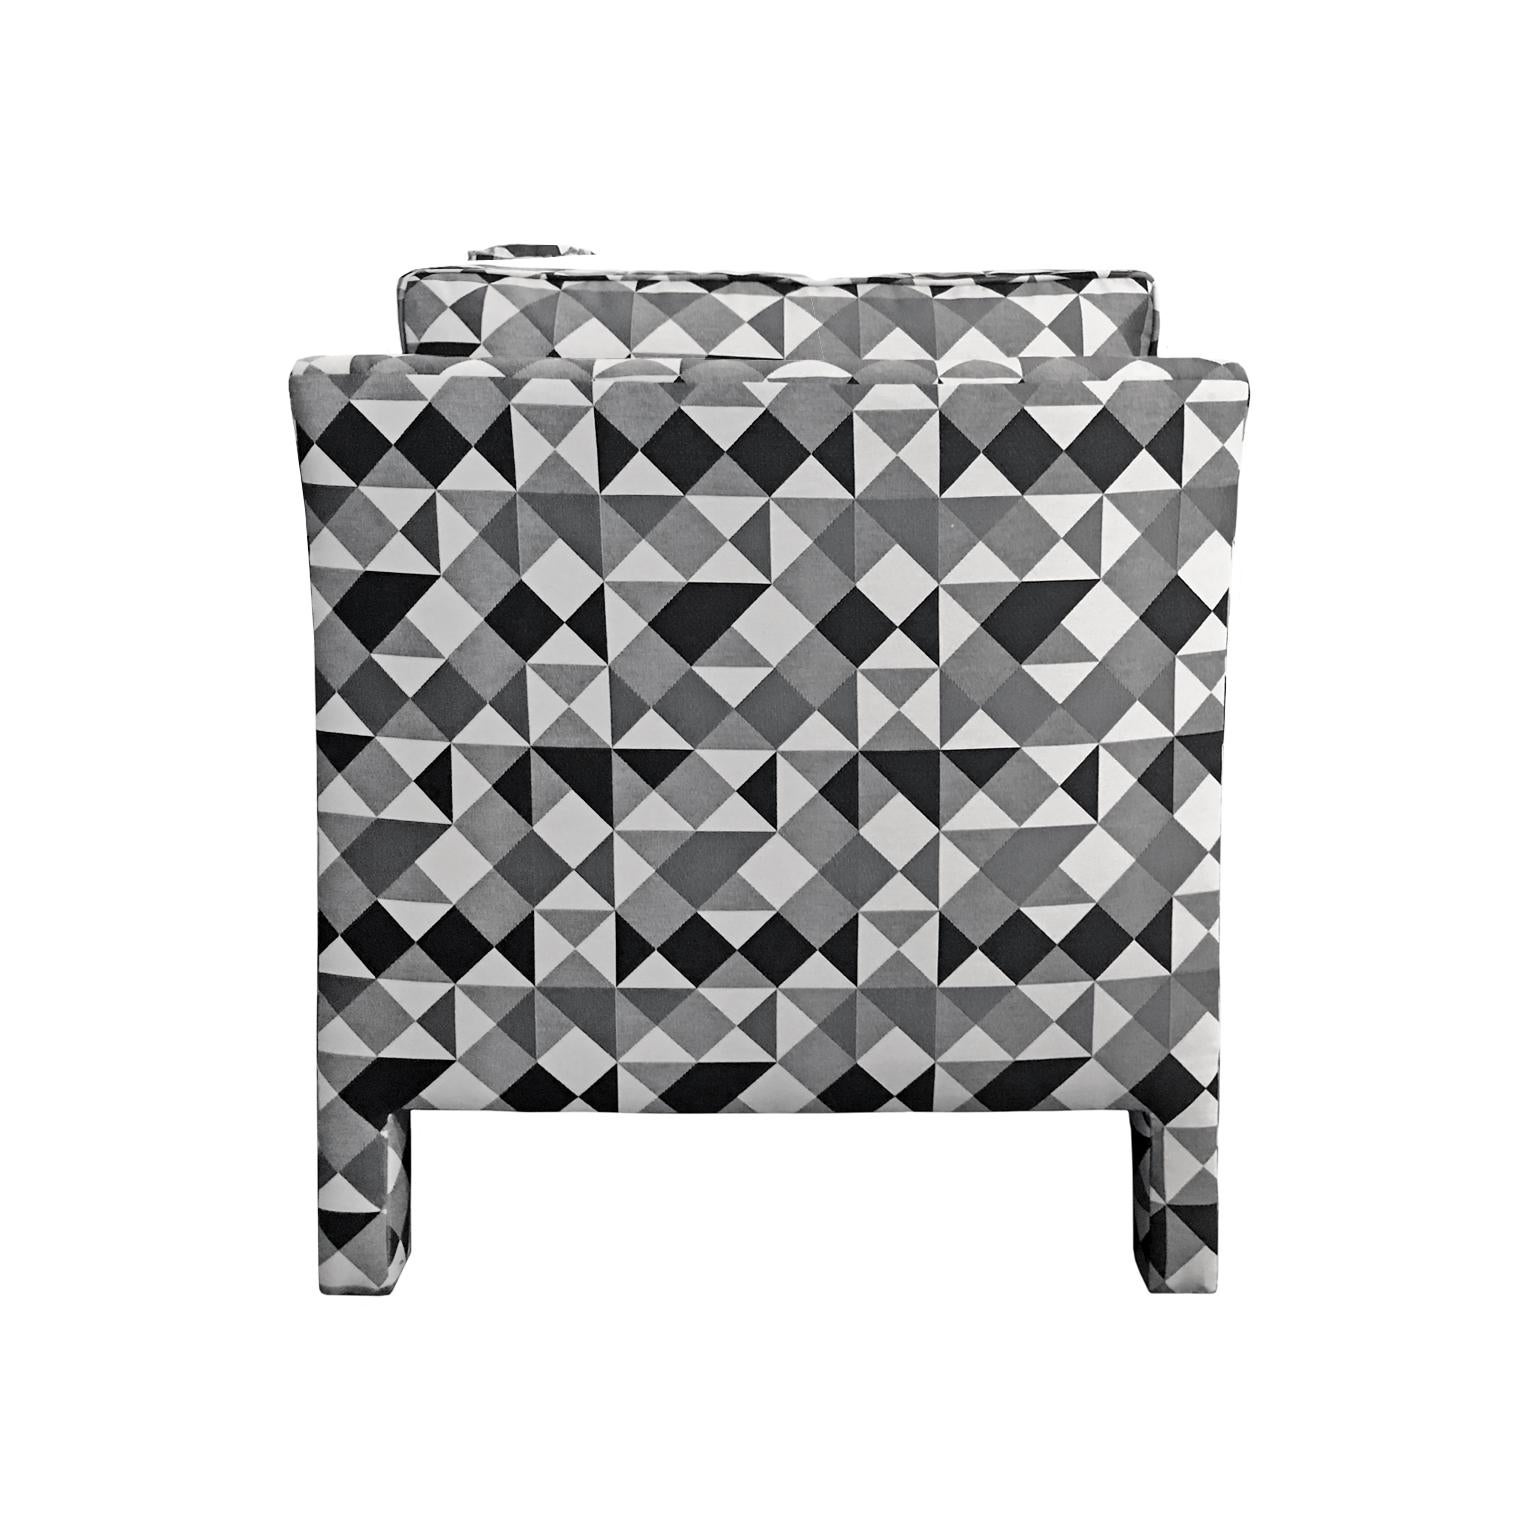 American 1970s Parsons Style Lounge Chair in Black, White and Grey Geometric Fabric For Sale